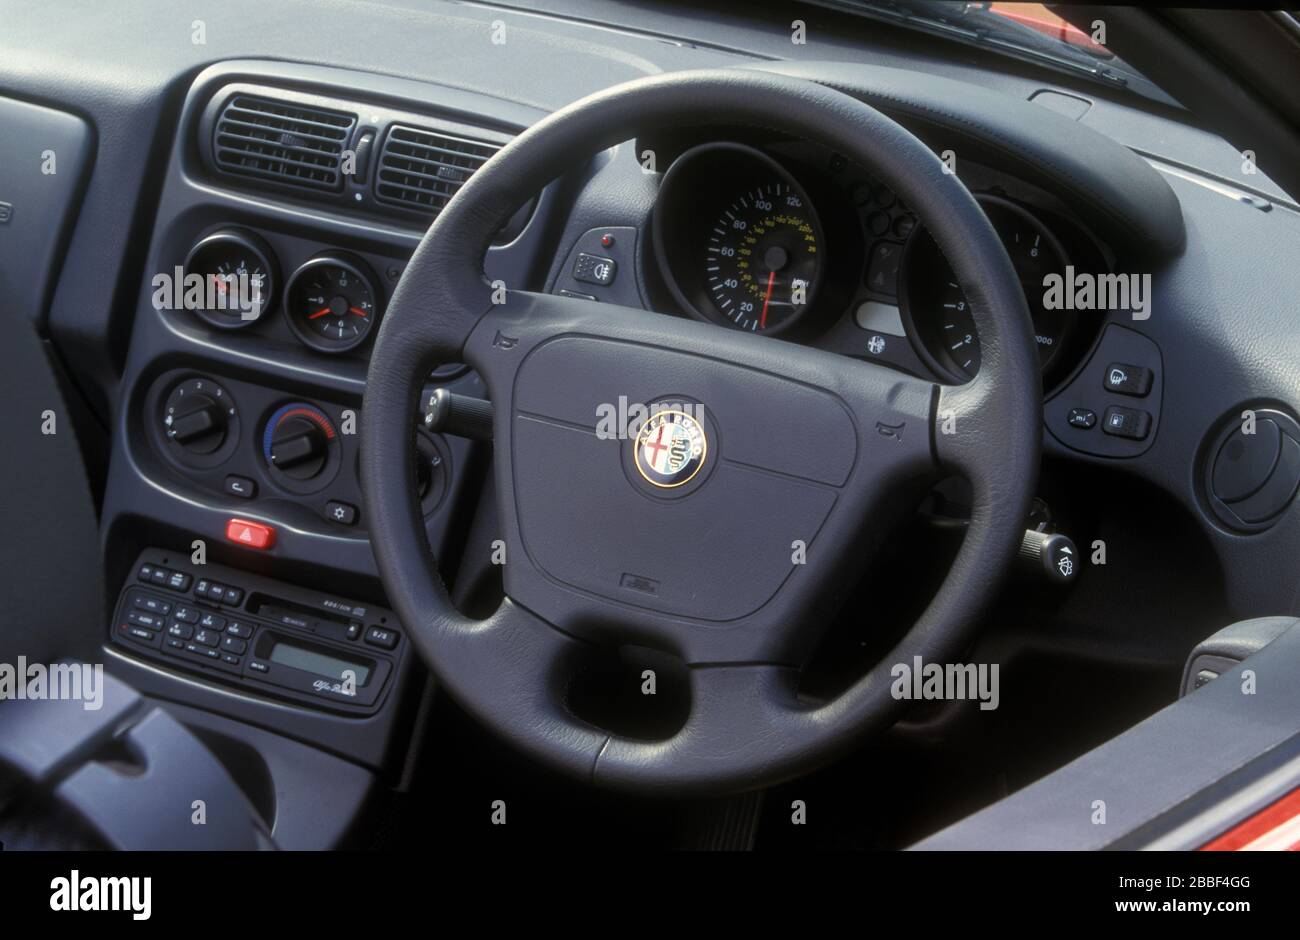 1996 alfa romeo spider hi-res stock photography and images - Alamy